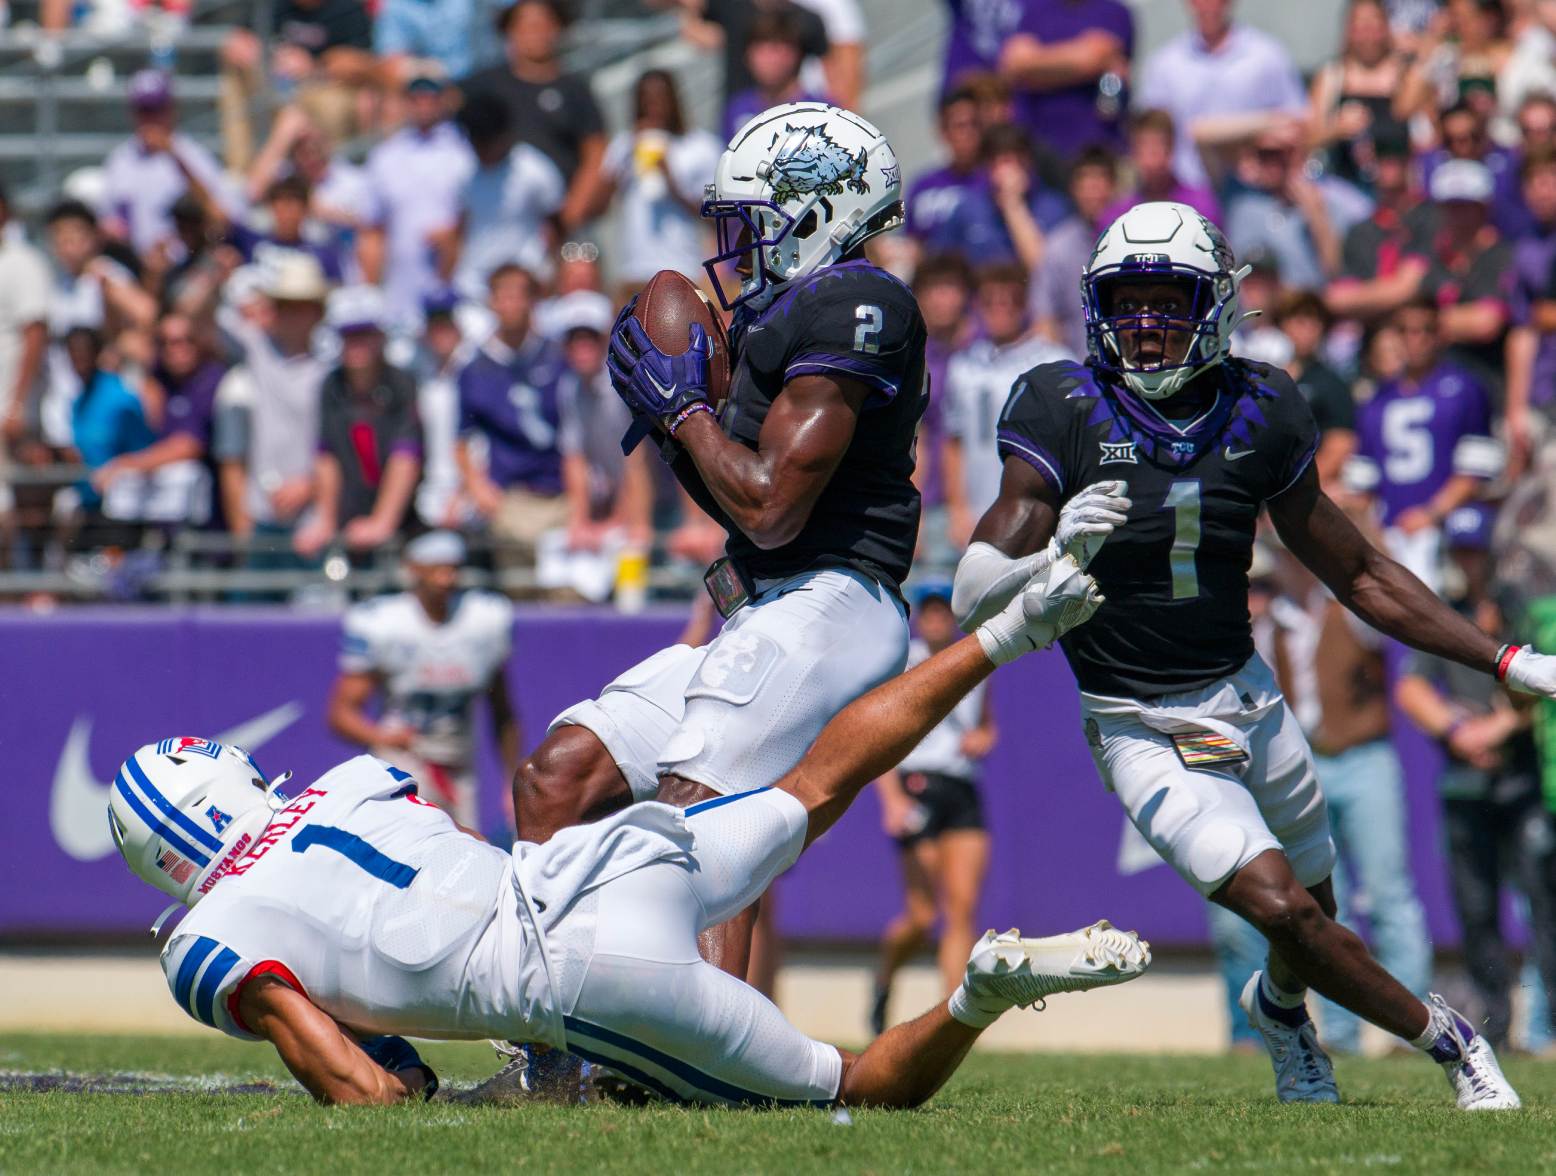 Sep 23, 2023; Fort Worth, Texas, USA; TCU Horned Frogs cornerback Josh Newton (2) intercepts a pass intended for SMU Mustangs wide receiver Jordan Kerley (1) during the second half at Amon G. Carter Stadium. Credit: Jerome Miron-USA TODAY Sports